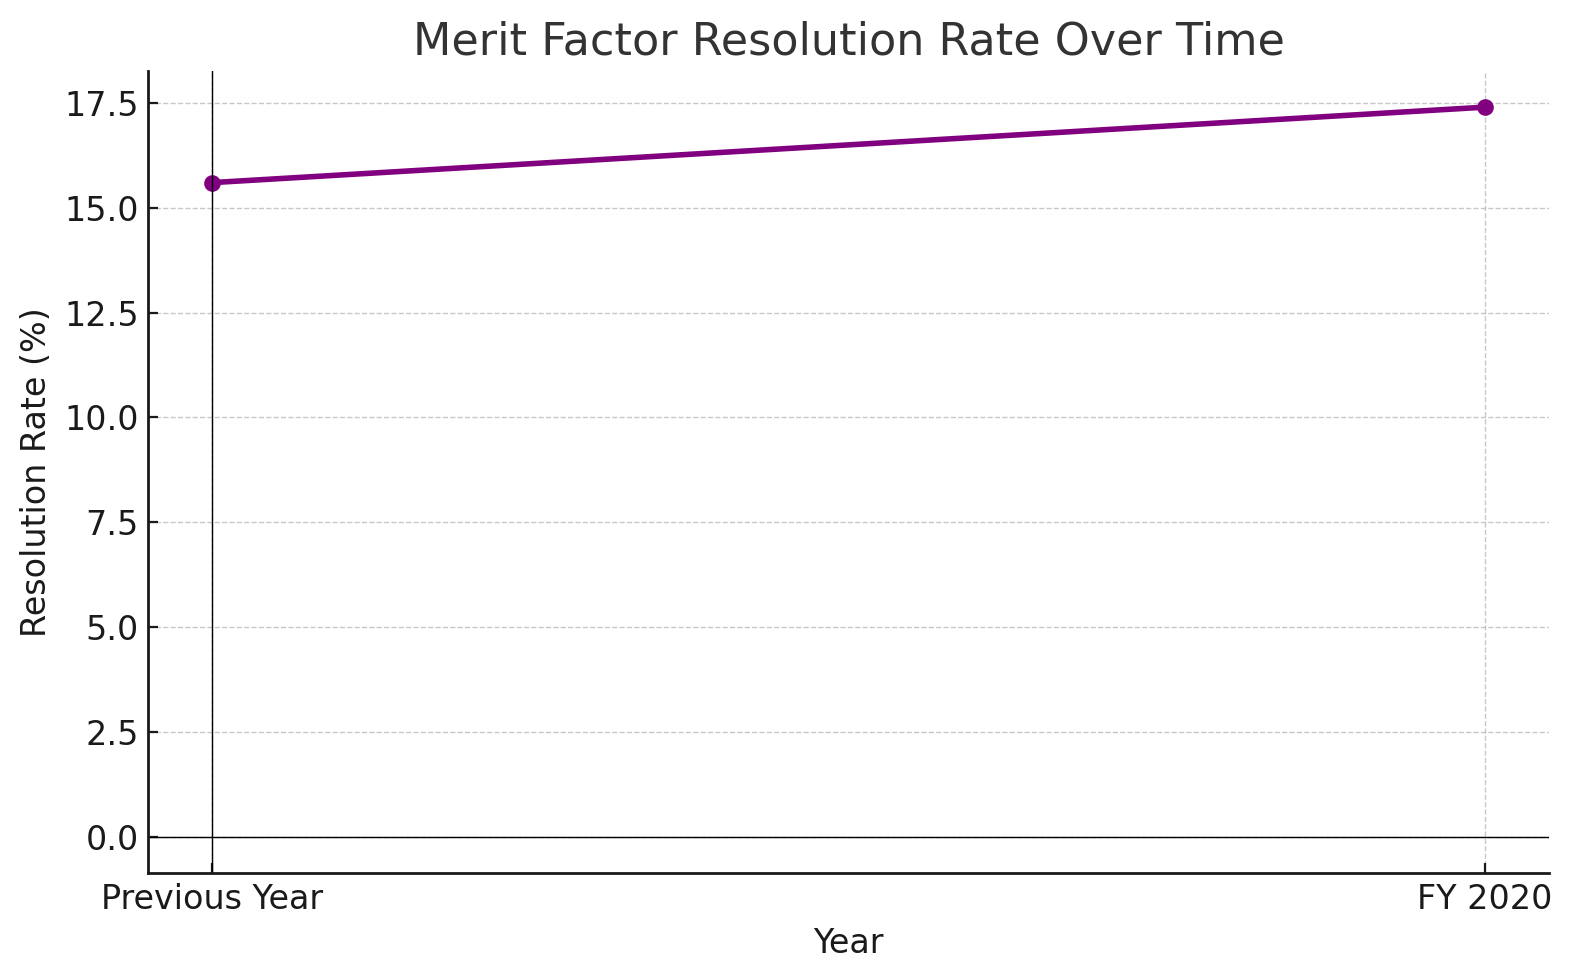 EEOC Resolution of Merit Claims Over Time